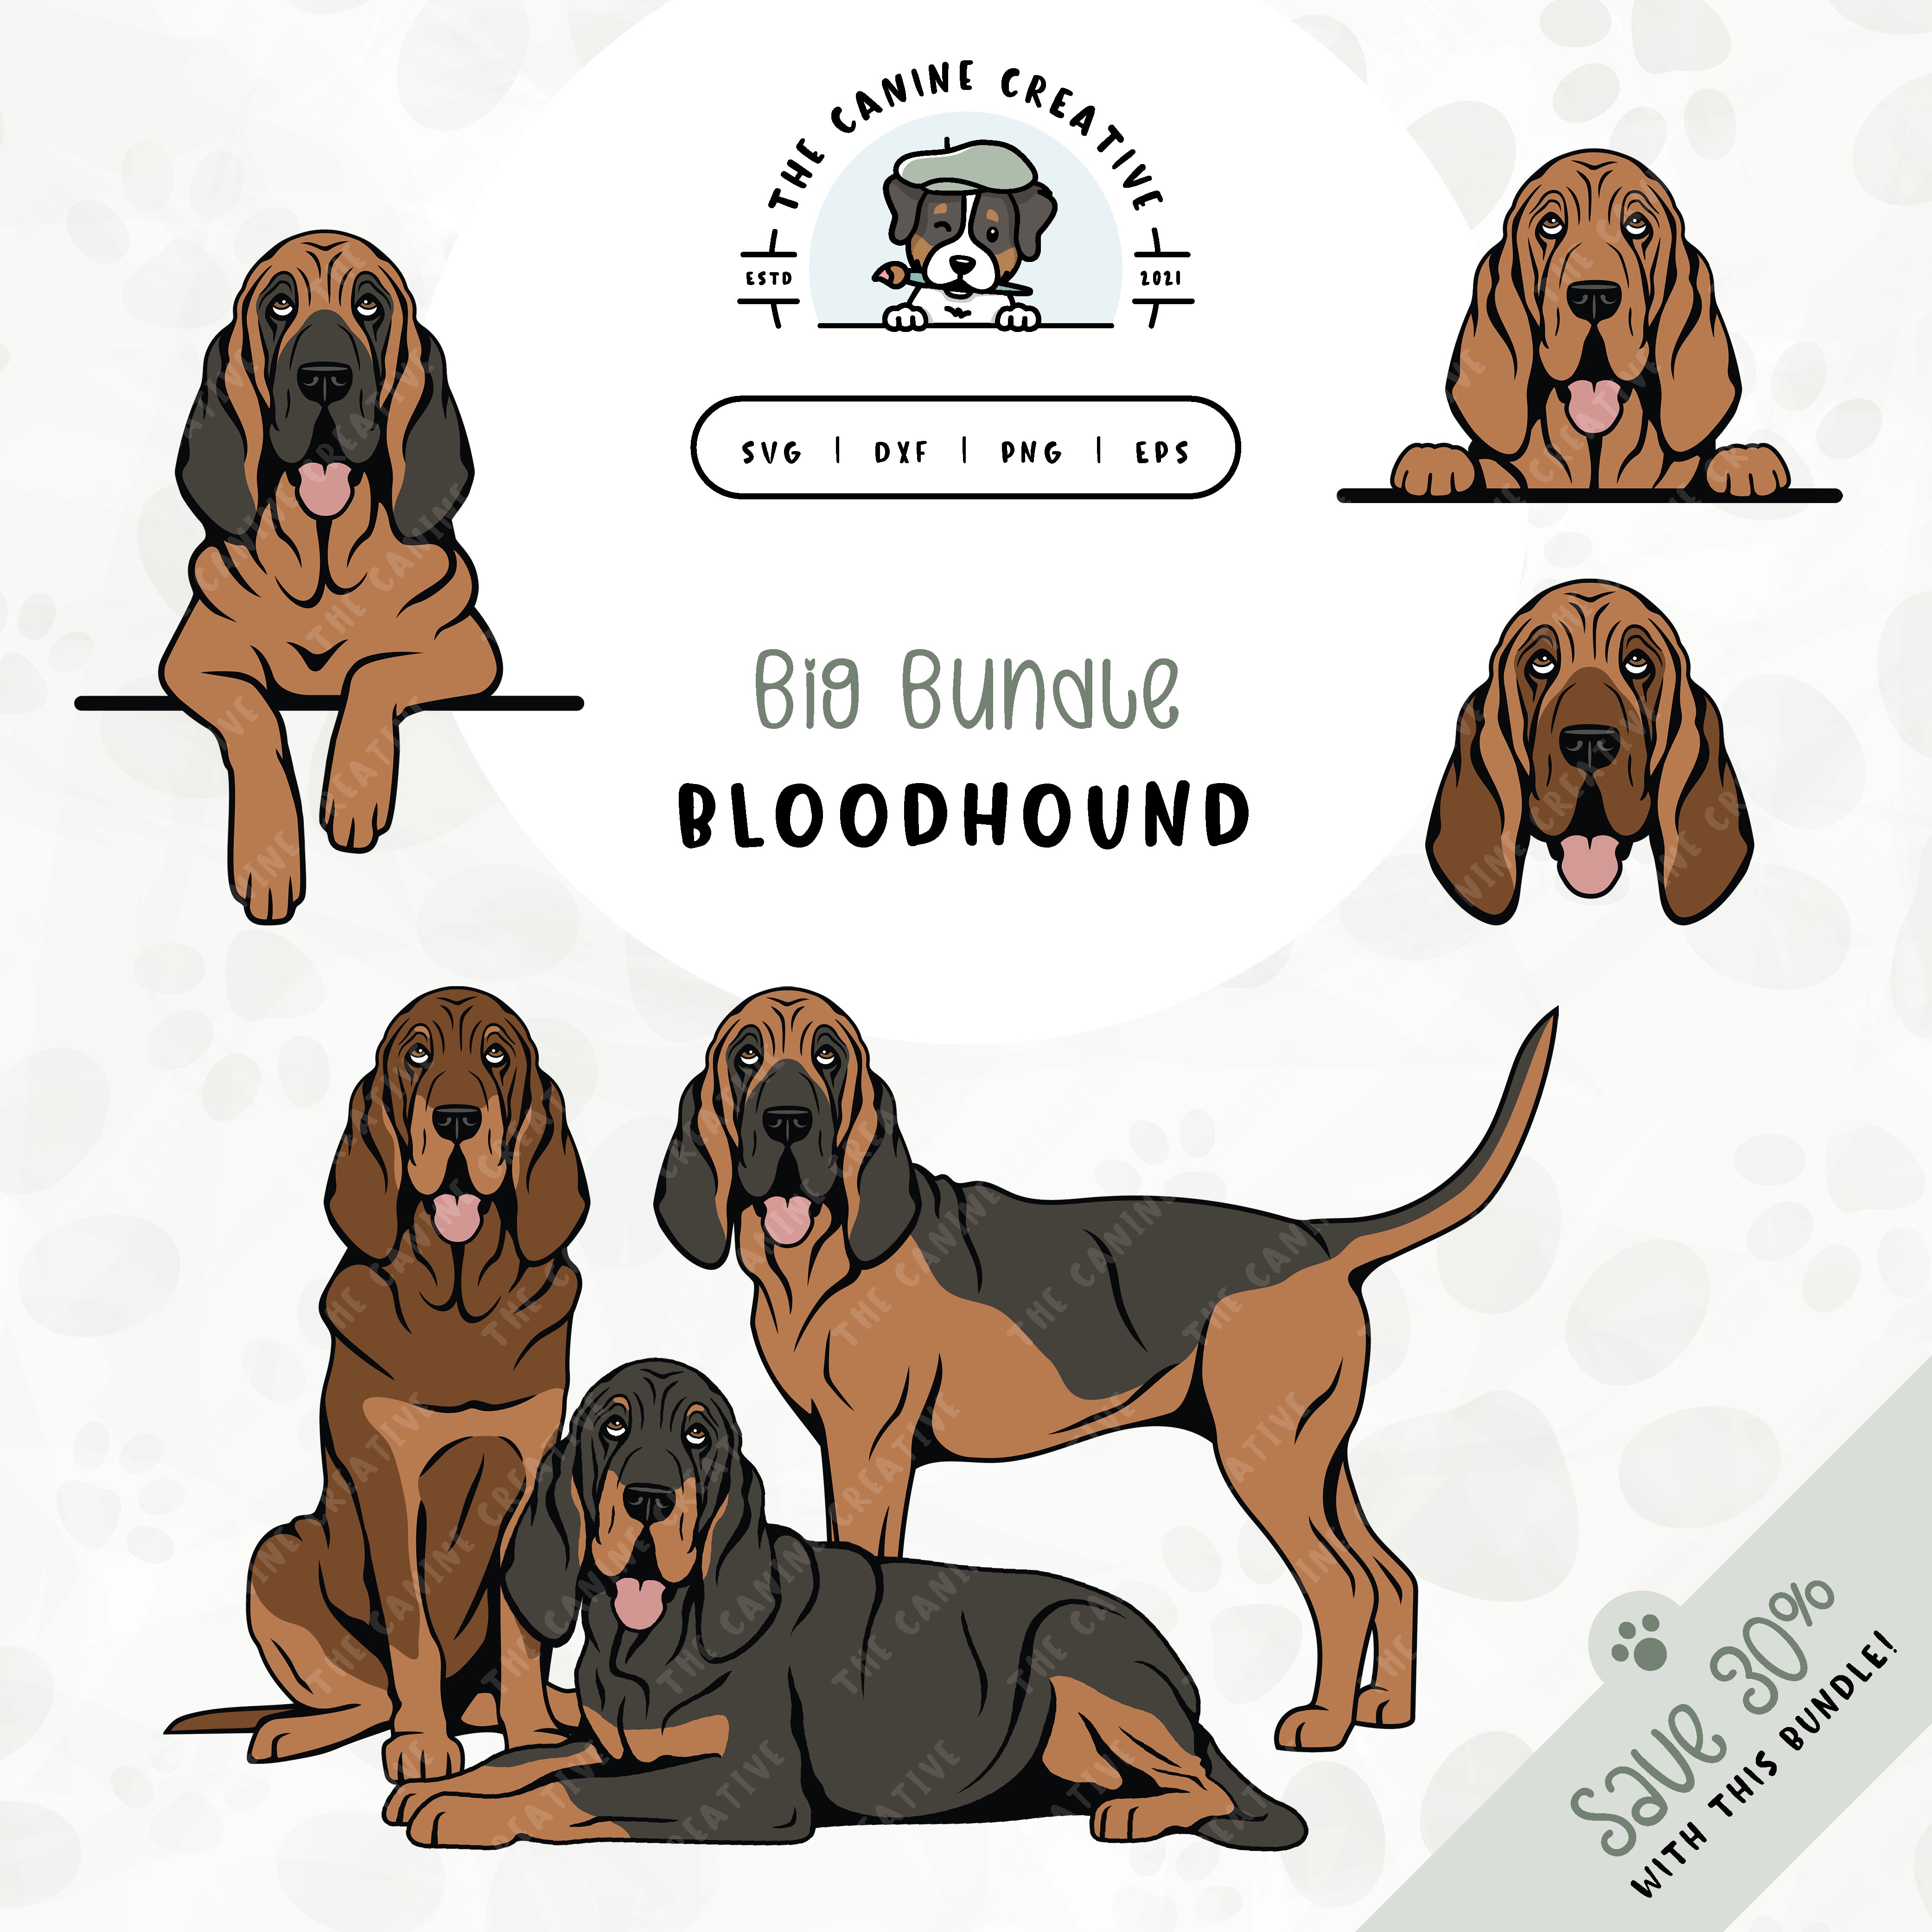 This 6-pack Bloodhound design bundle includes dog faces and five different poses: sitting, standing, laying down, and peeking (2 options). File formats include: SVG, DXF, PNG, and EPS.